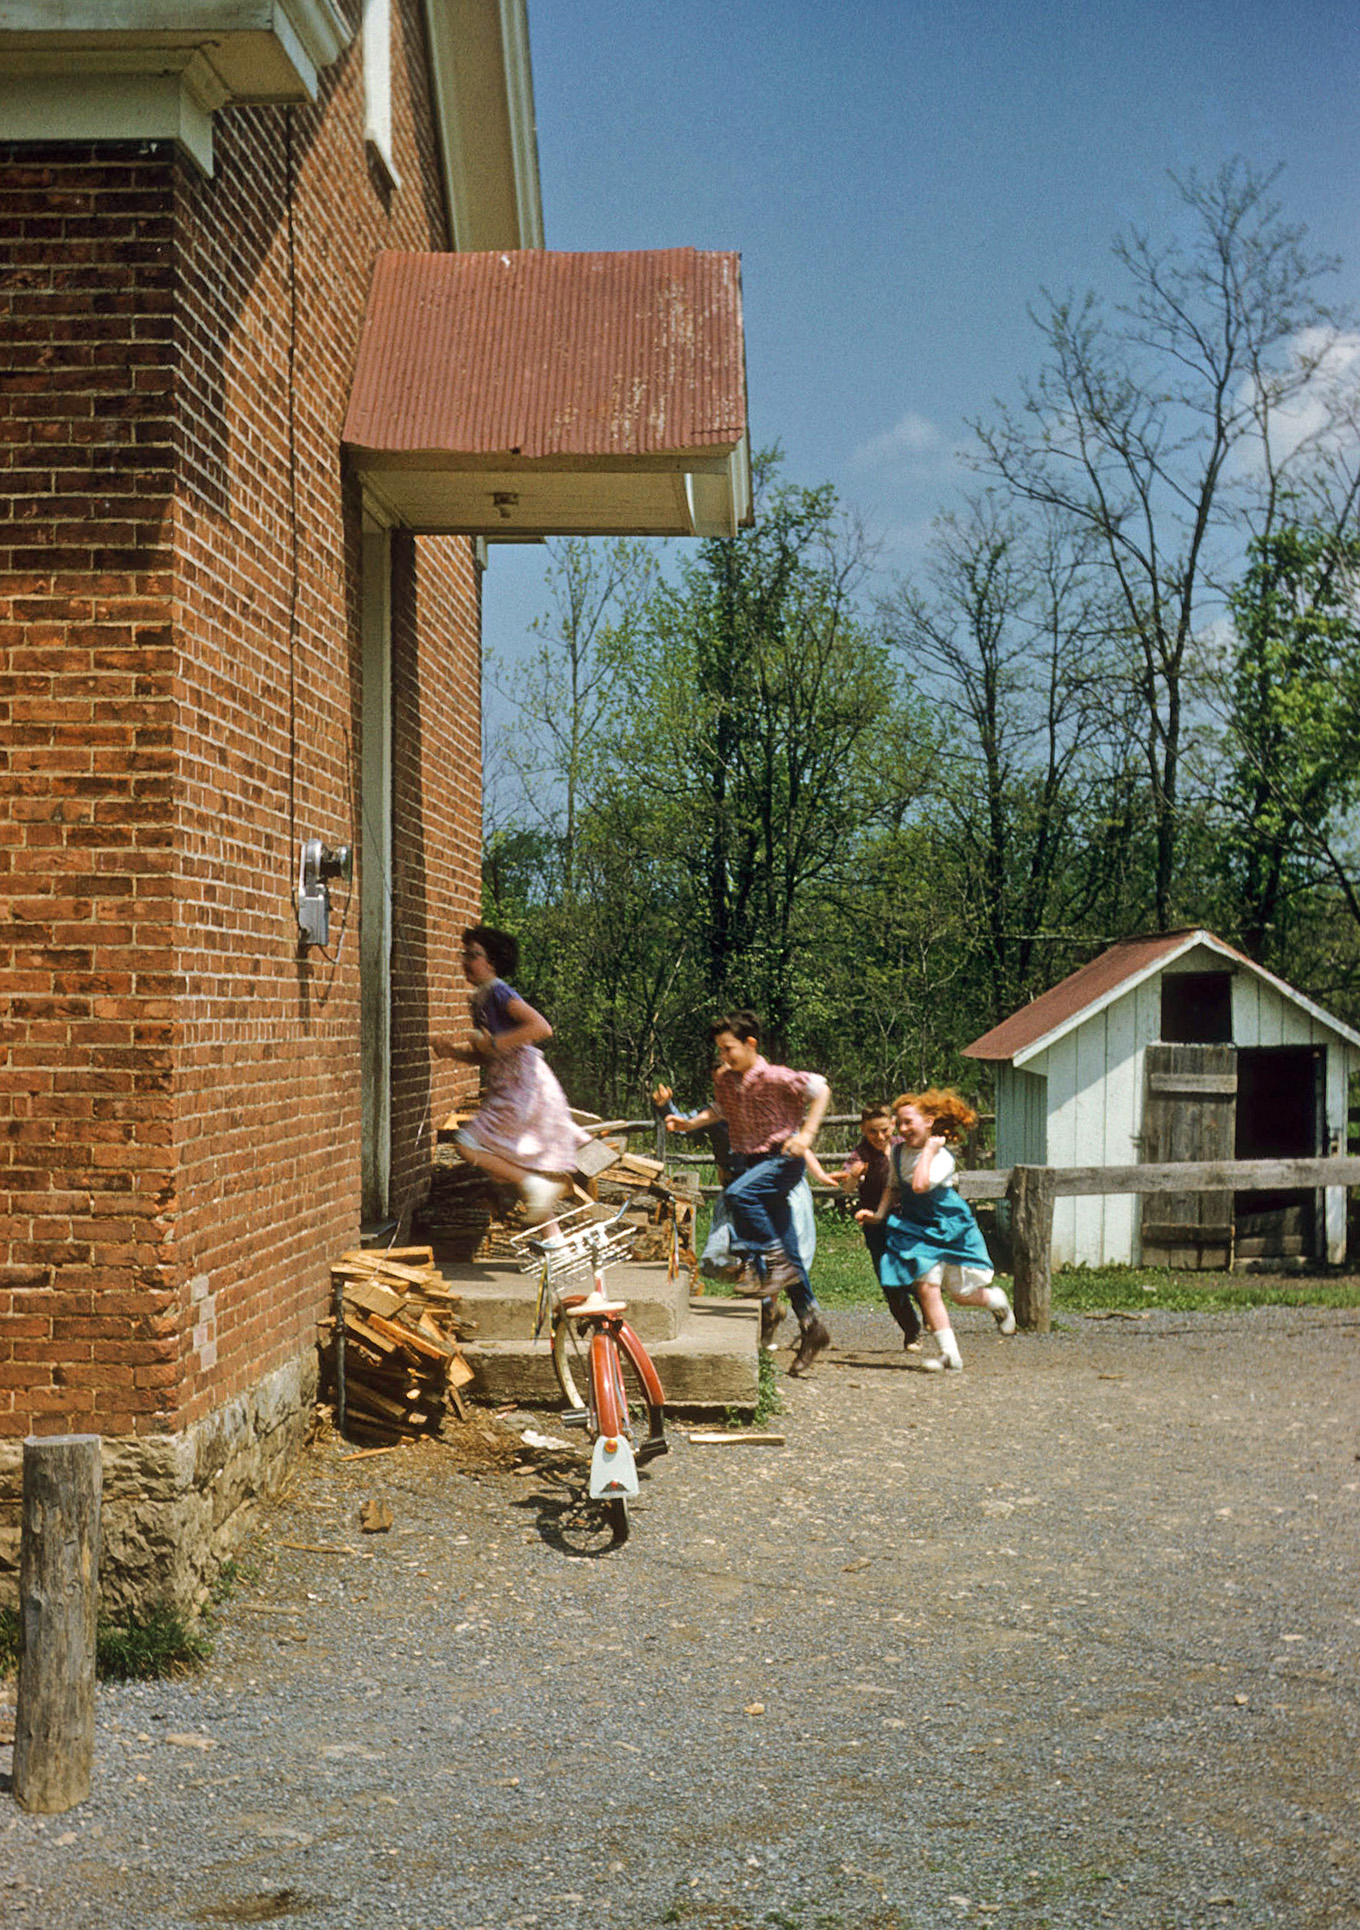 My grandfather documented the last day in session for my mother's one-room school in Honey Grove, Pennsylvania, in 1958. View full size.